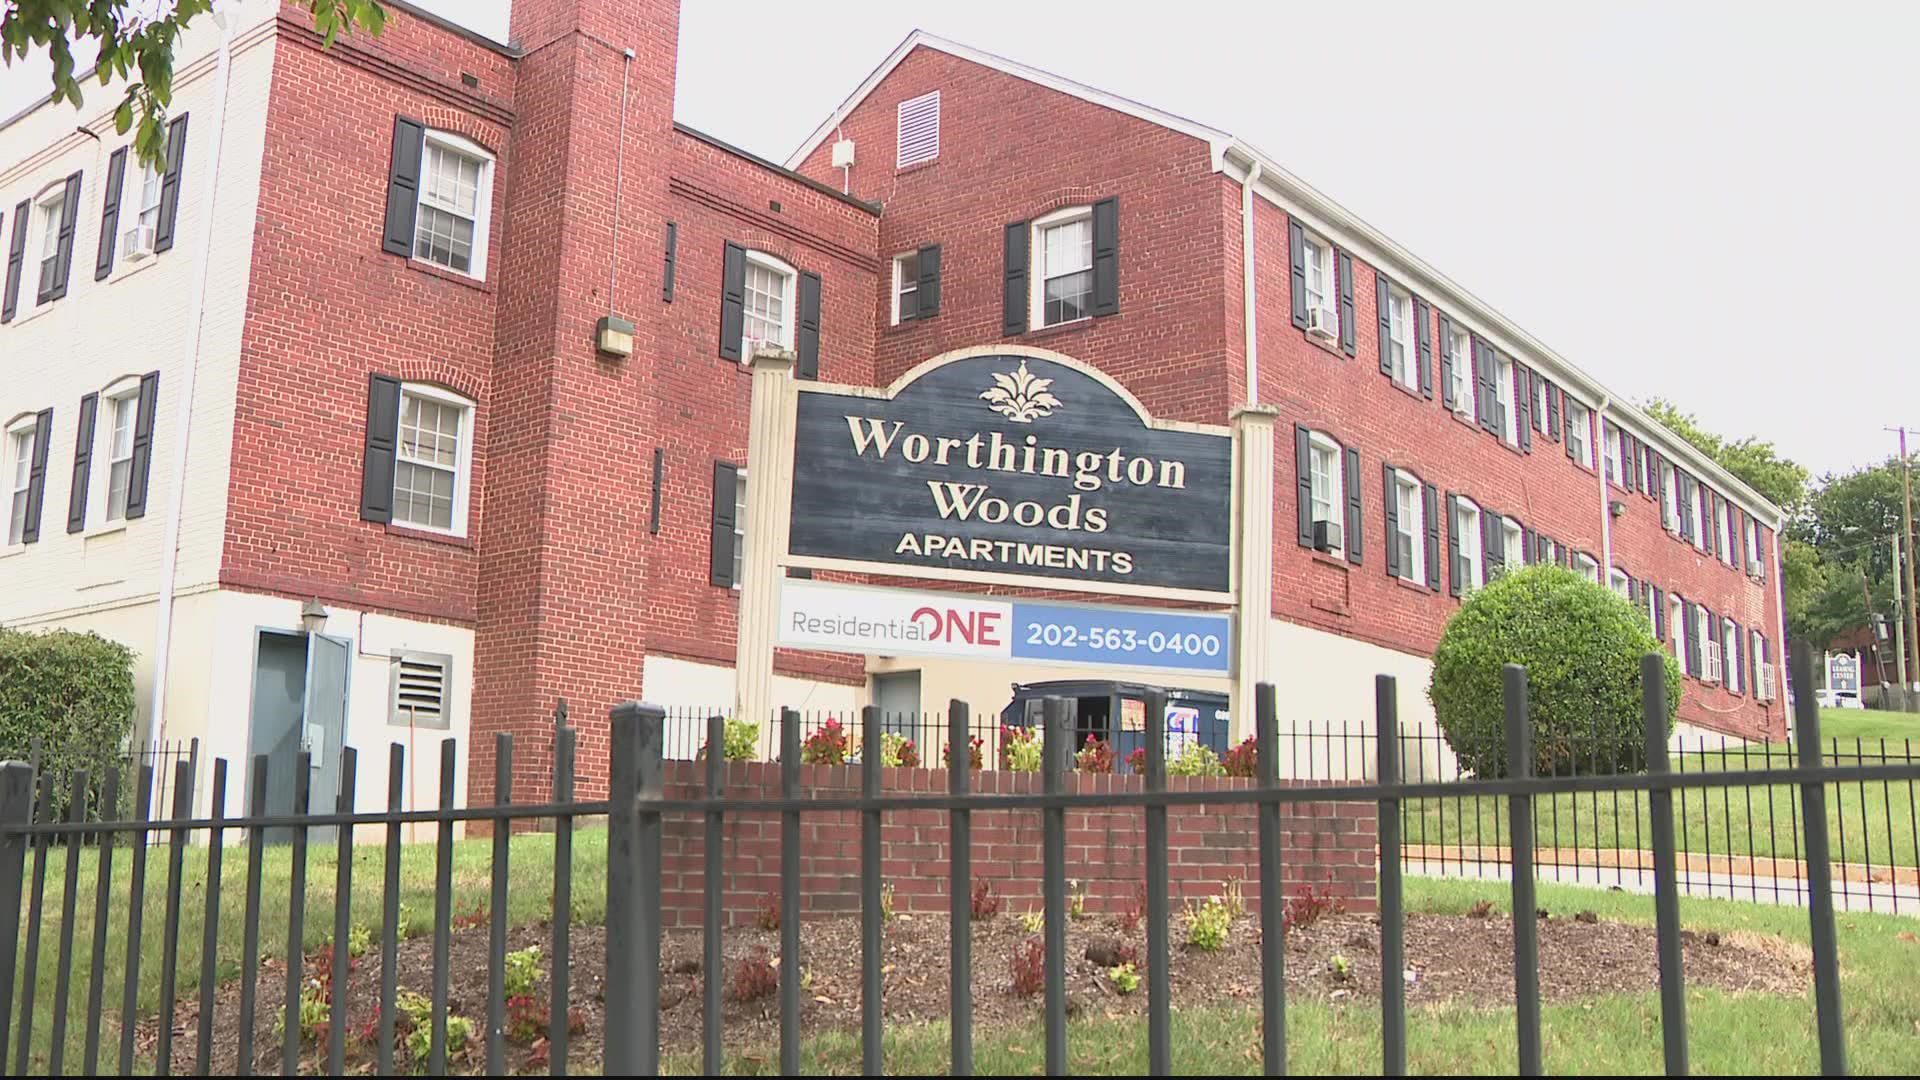 A Howard University graduate said her tub has repeatedly filled up with raw sewage, among other problems.